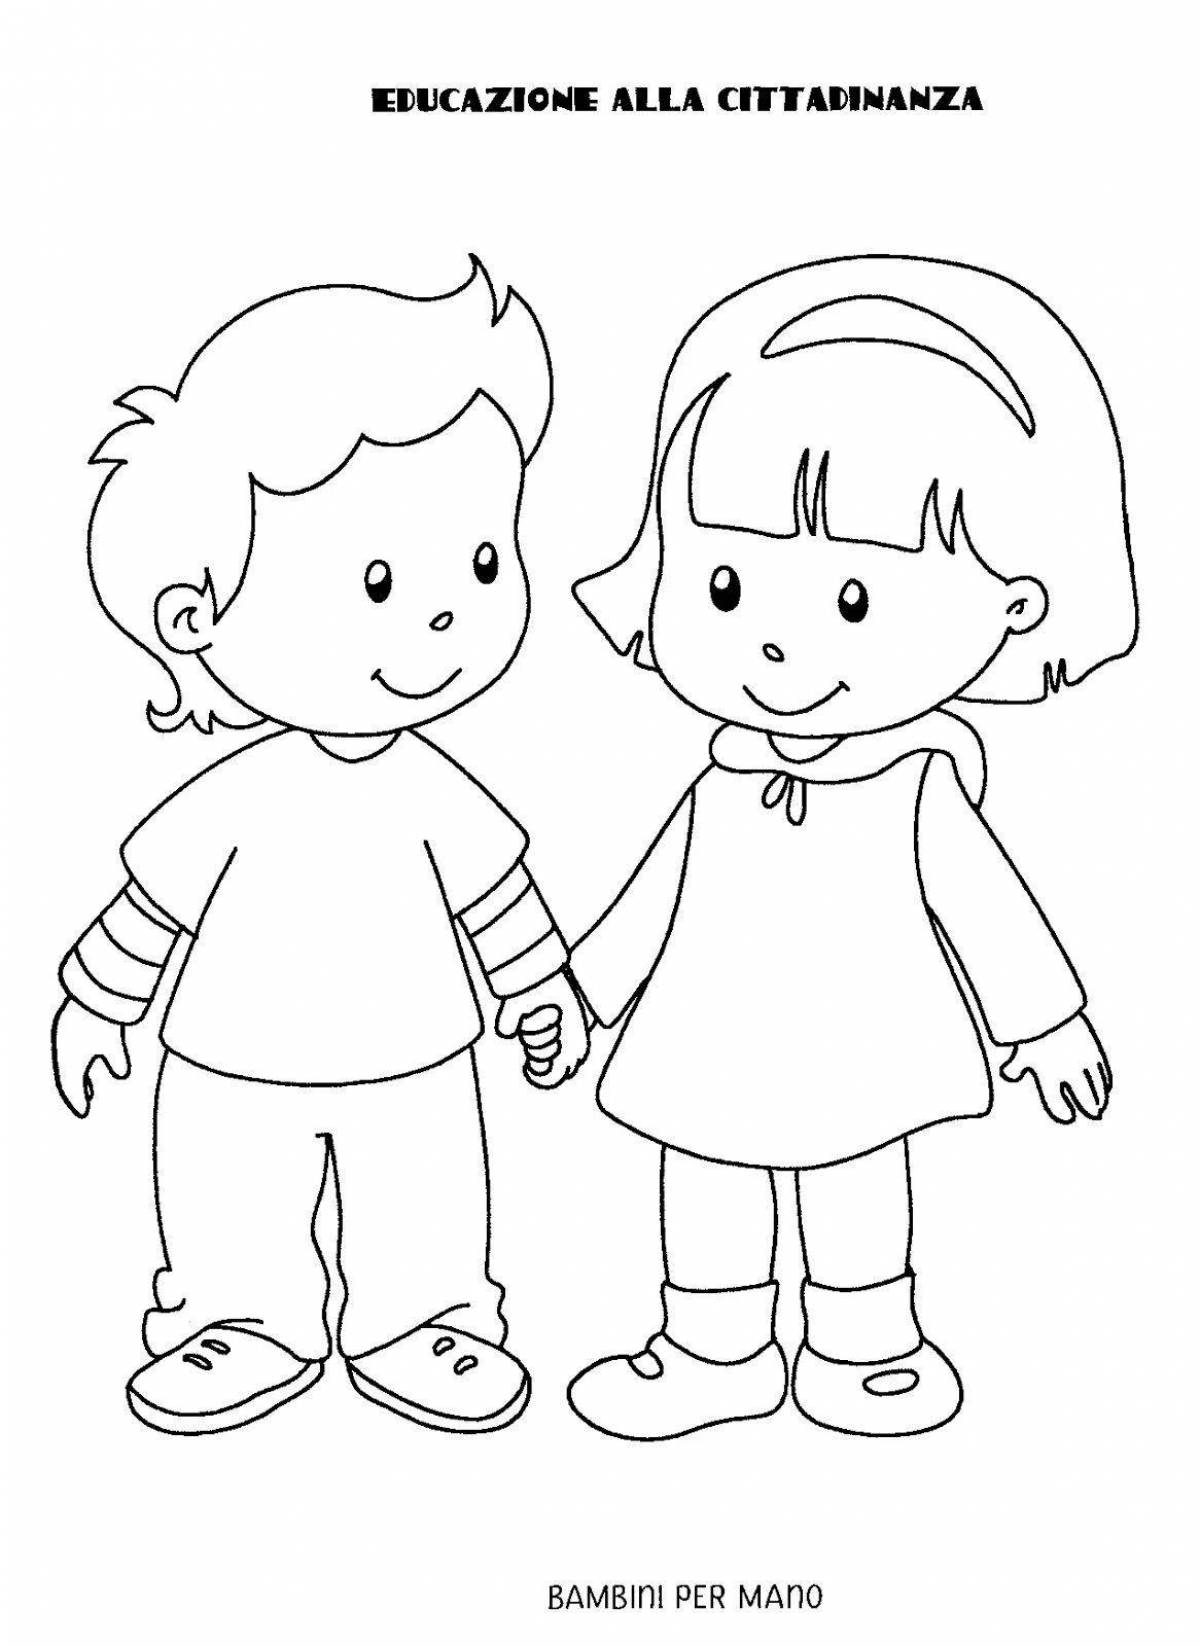 Coloring page joyful boy and girl holding hands